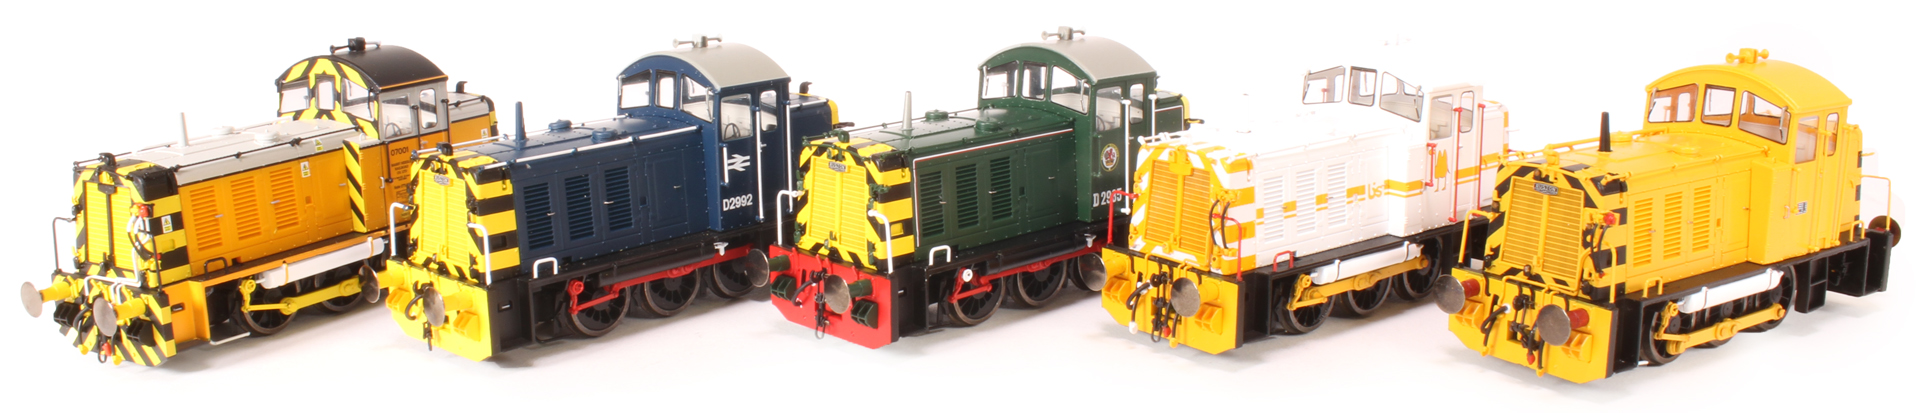 Five of the Class 07 shunters available from Heljan